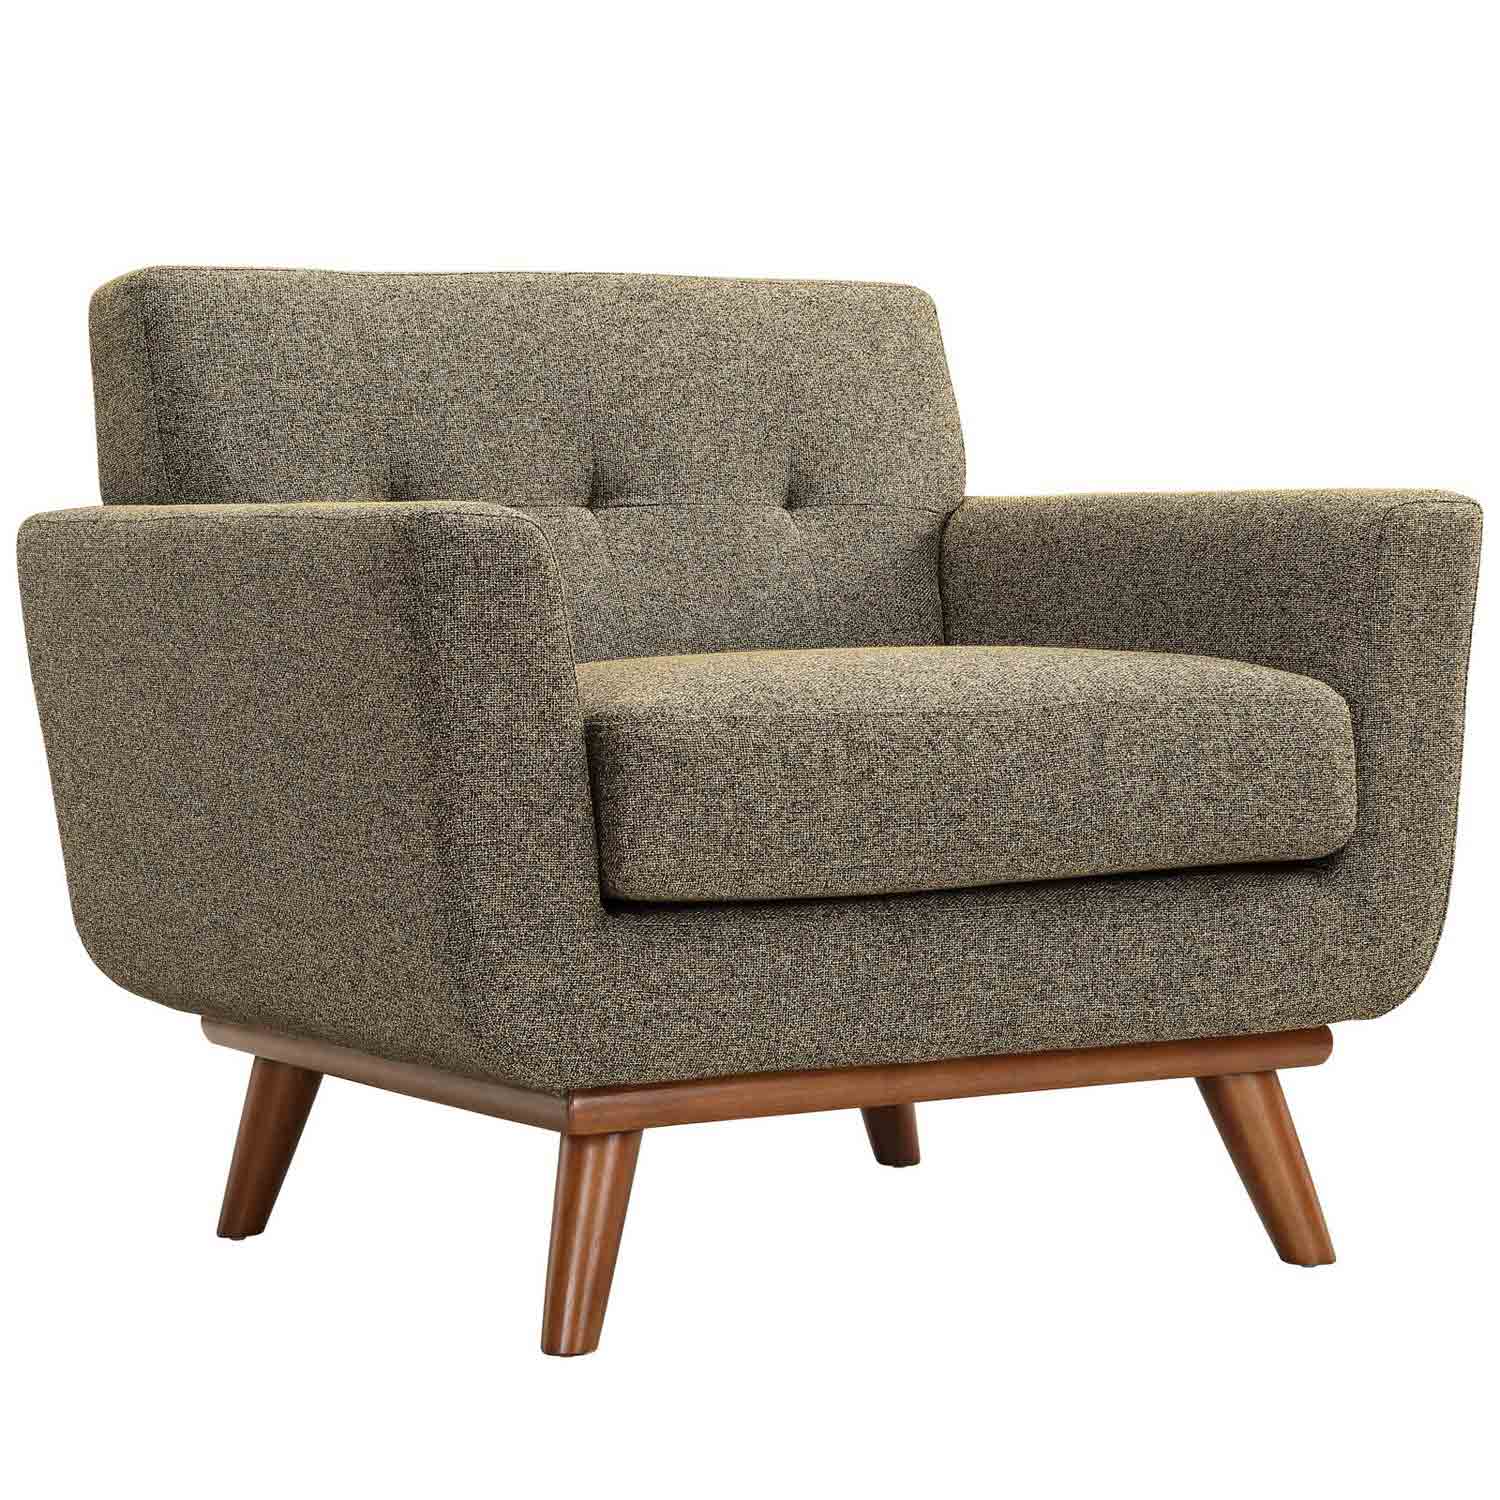 Modway Engage Armchairs and Sofa Set of 3 - Oatmeal